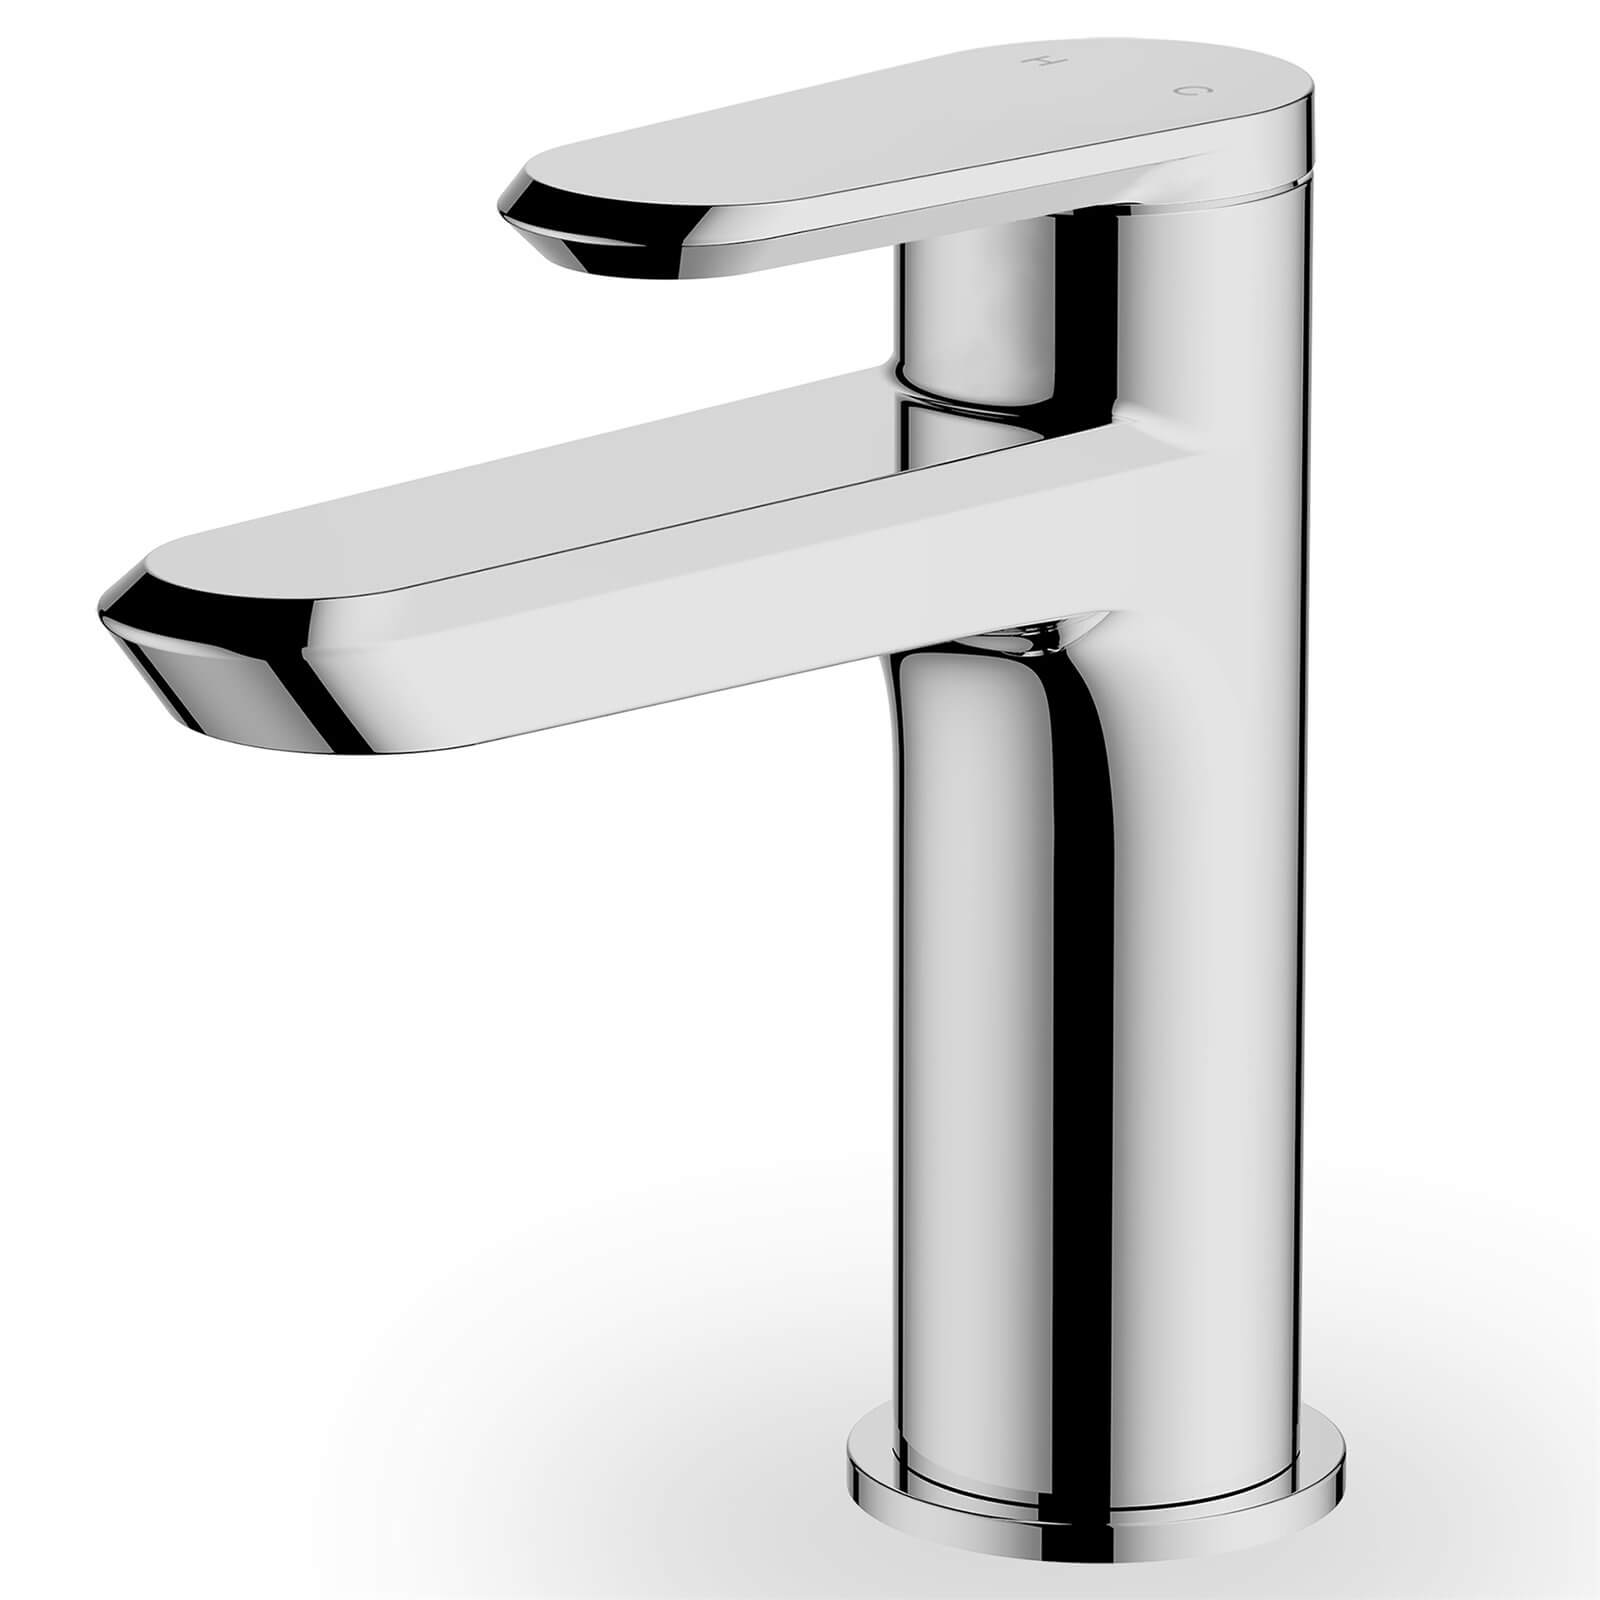 Skelwith Standard Basin Mixer Tap - Chrome